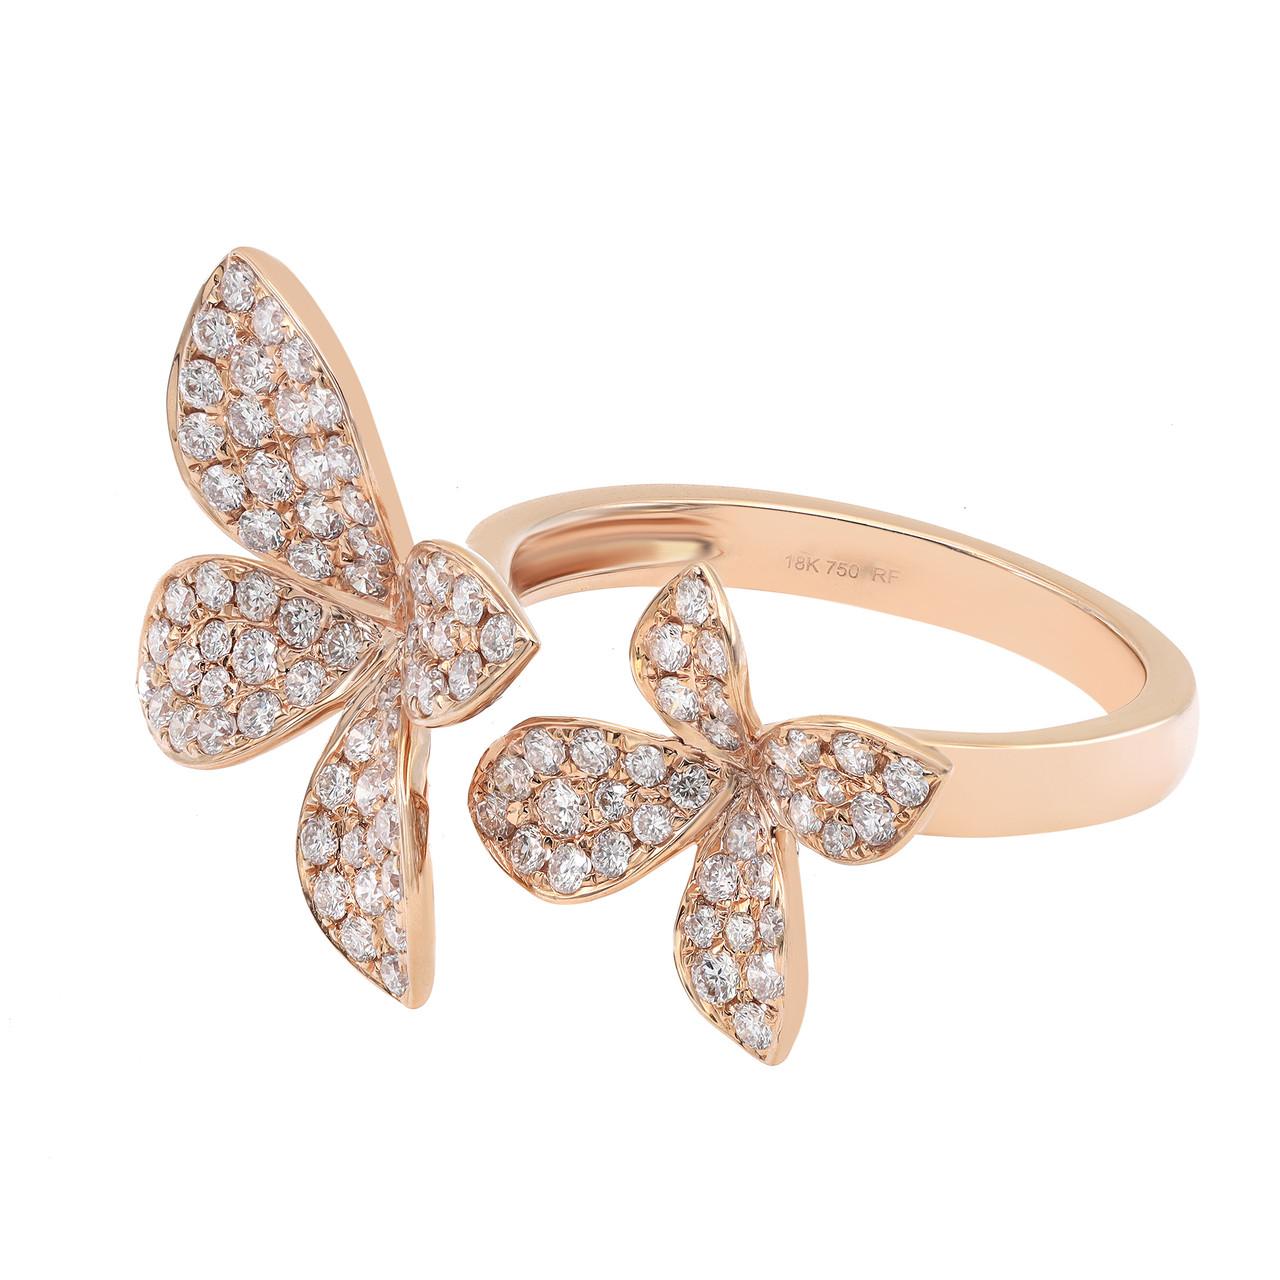 Indulge in the sheer beauty of our 0.95 Carat Diamond Double Flower Statement Ring in 18K Rose Gold. This enchanting piece effortlessly blends elegance and whimsy, showcasing two exquisite blooms adorned with shimmering diamonds. Its open-style